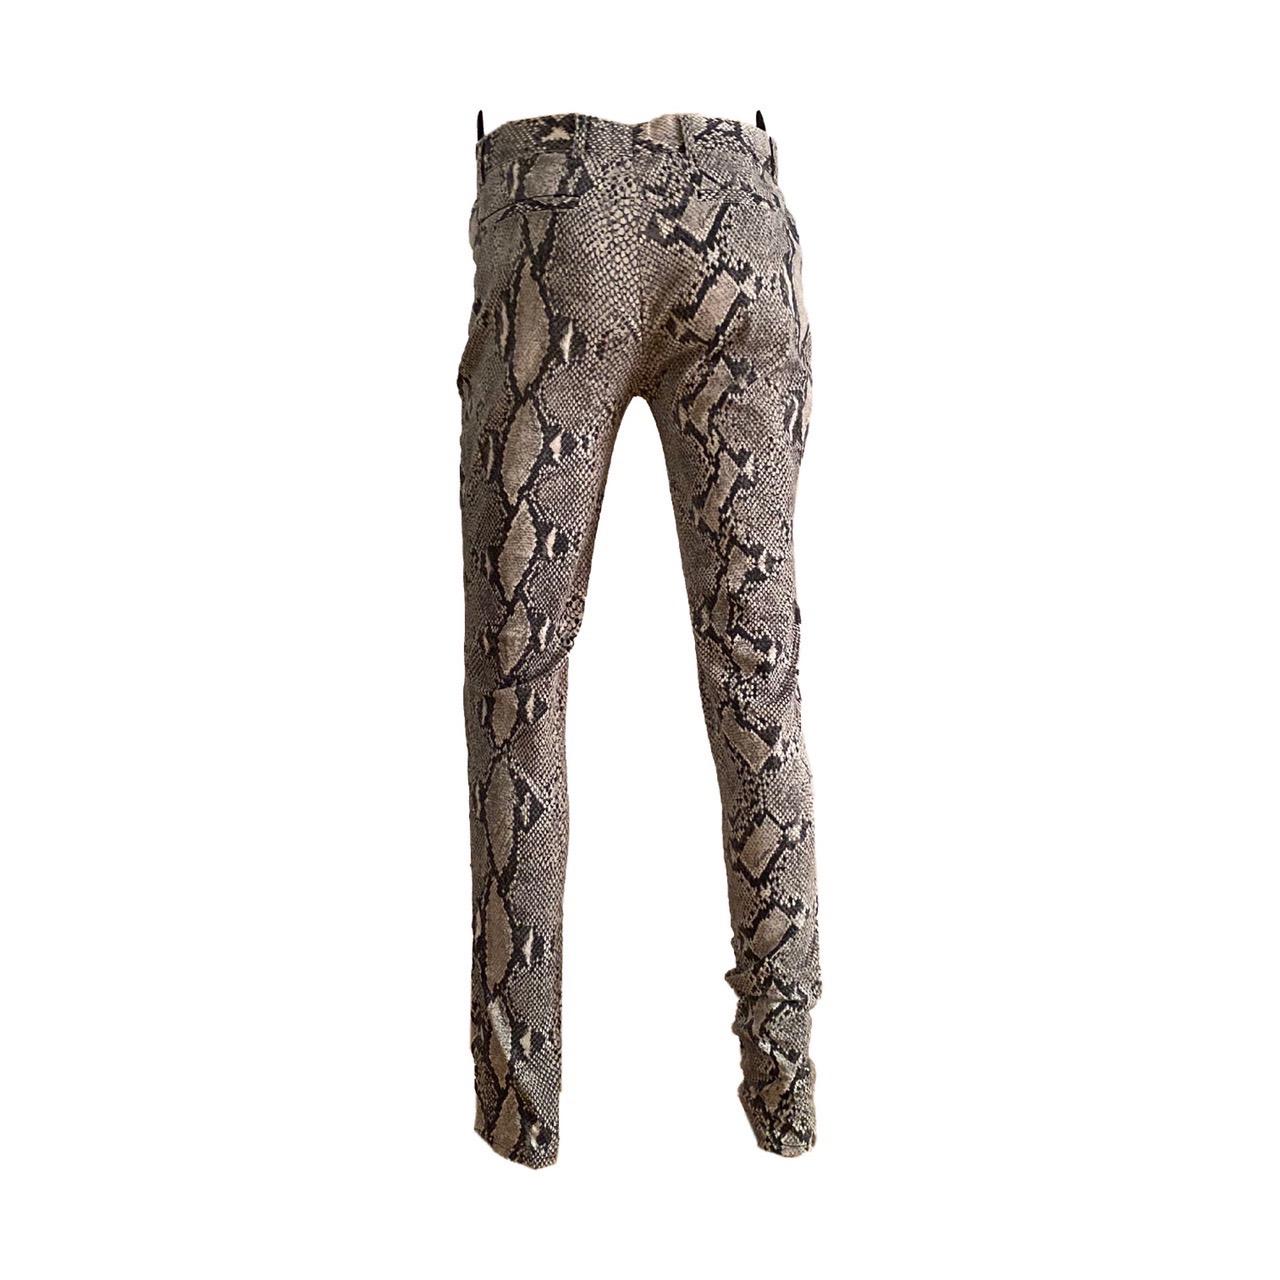 Tom Ford for Gucci grey snake skin print cotton skinny trousers from the Spring/Summer 2000 collection. Similar version showcased on the runway (Look 3, Oluchi Onweagba)

SIZE IT 44

Waistline – 80 cm / 31,4 inches  
Outseam – 104 cm / 40,9 inches